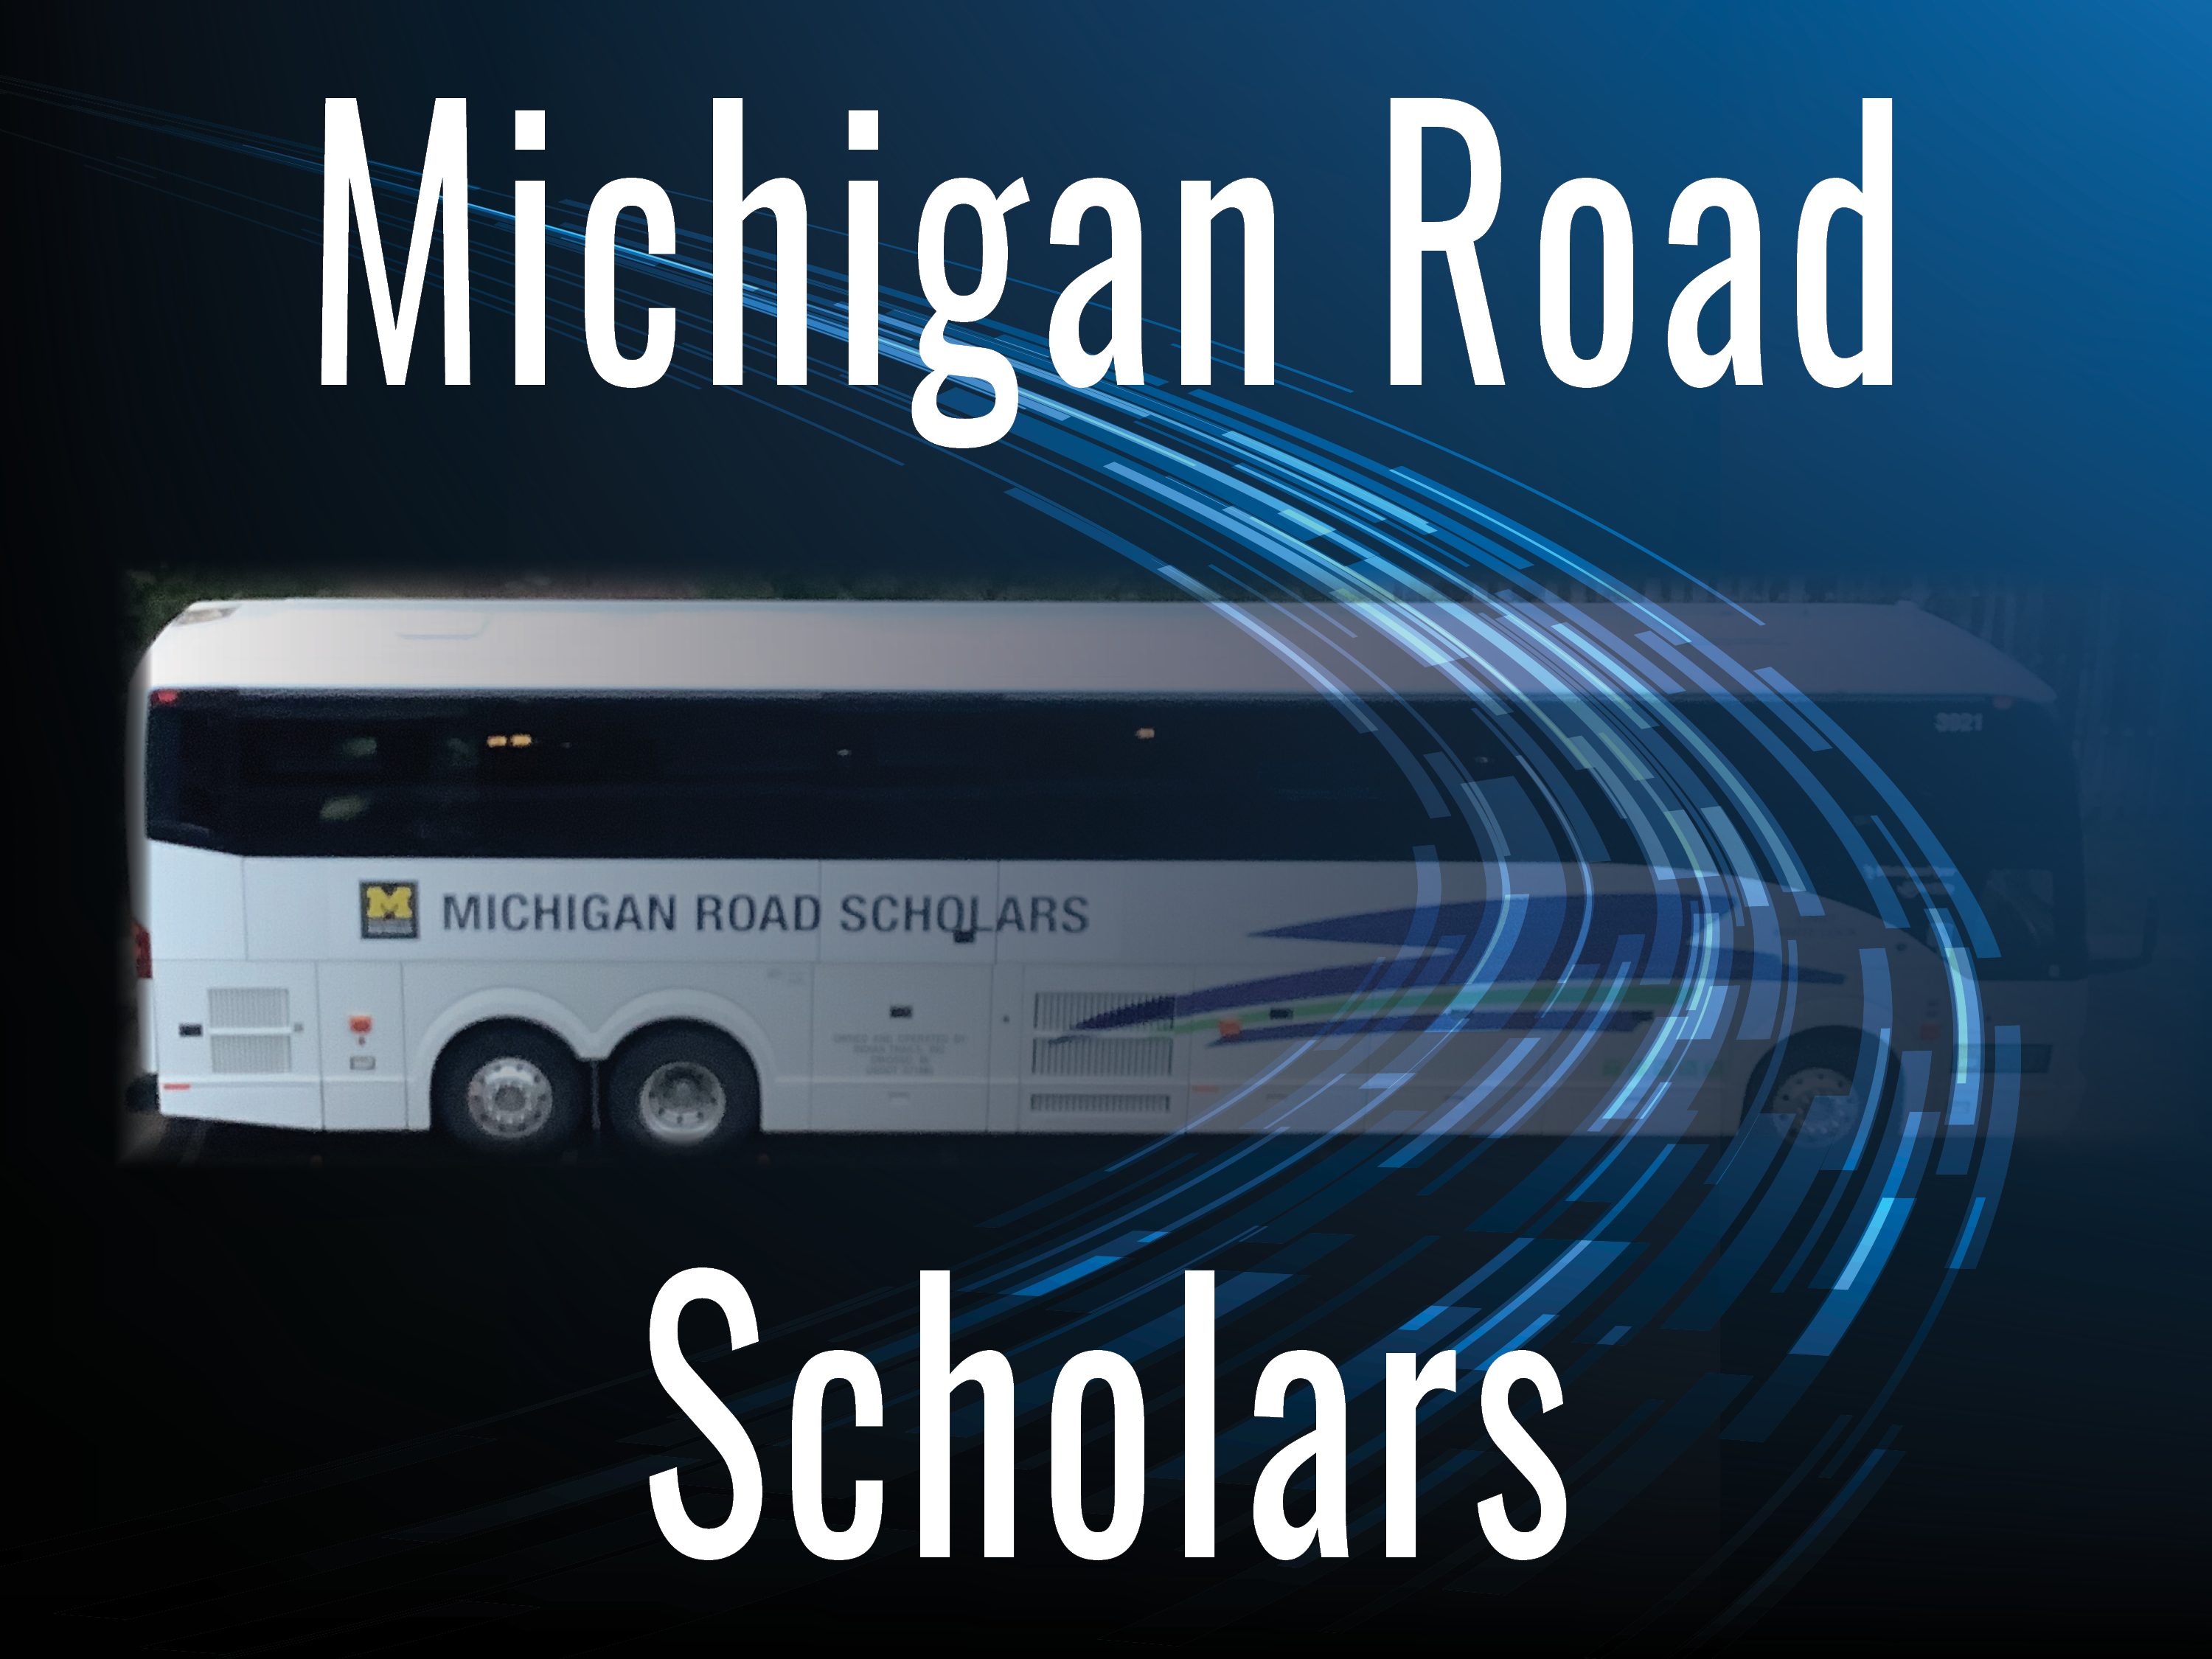 A bus with Michigan Road Scholars fades into a blue background with an abstract road